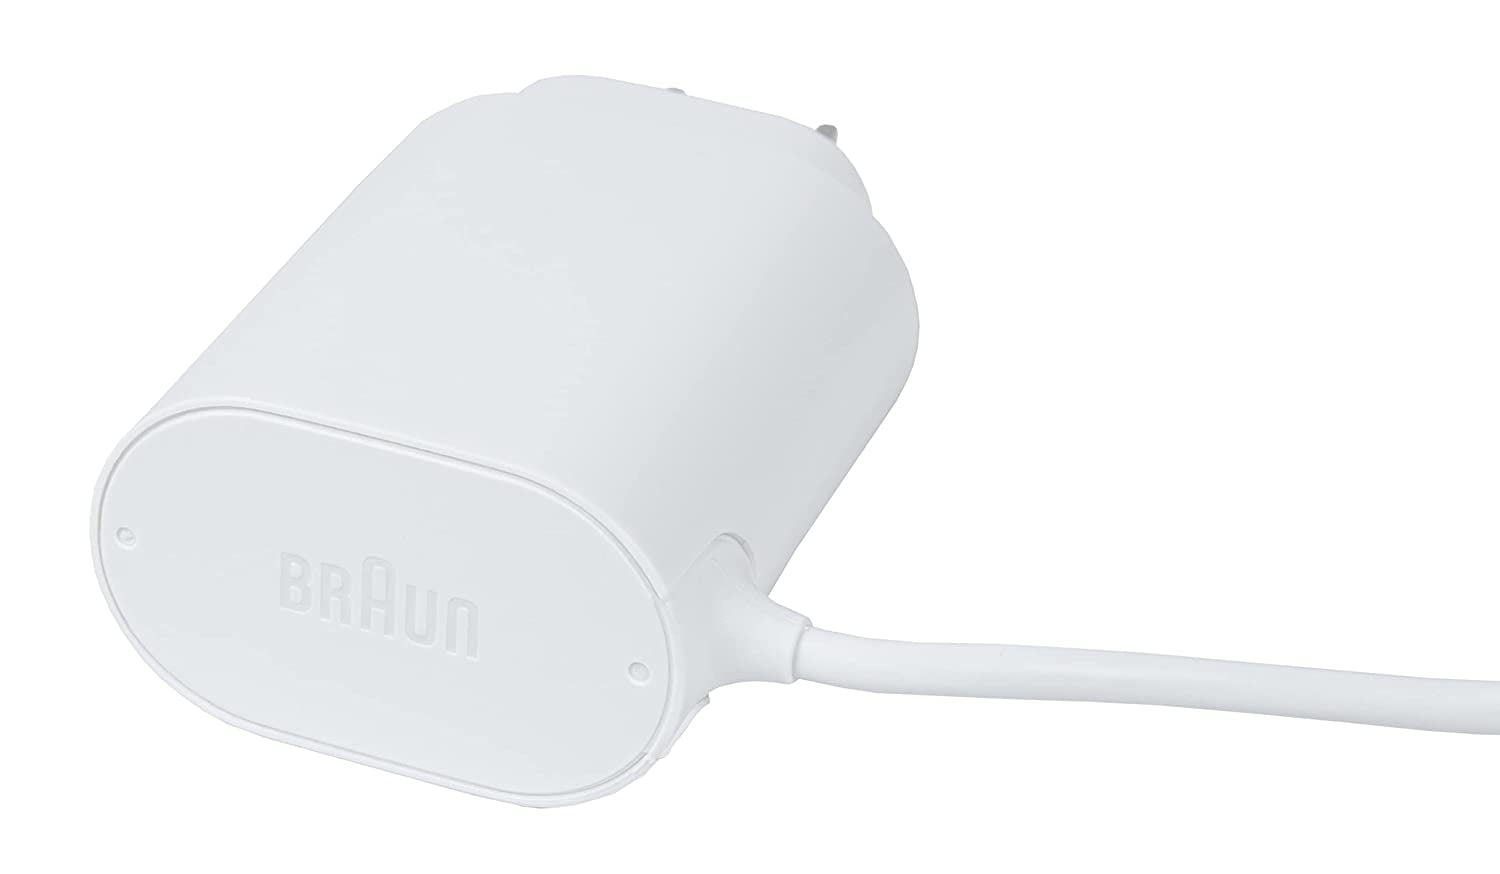 Braun - Replacement Wall Charger for Braun Silk-épil Part-No.: 81743351 -  Type/Tipo 492-5214 Power Adapter Cord Shaver Charger 12V 400mA -  Replacement for Braun Epilator (Type 492-5214, White) 